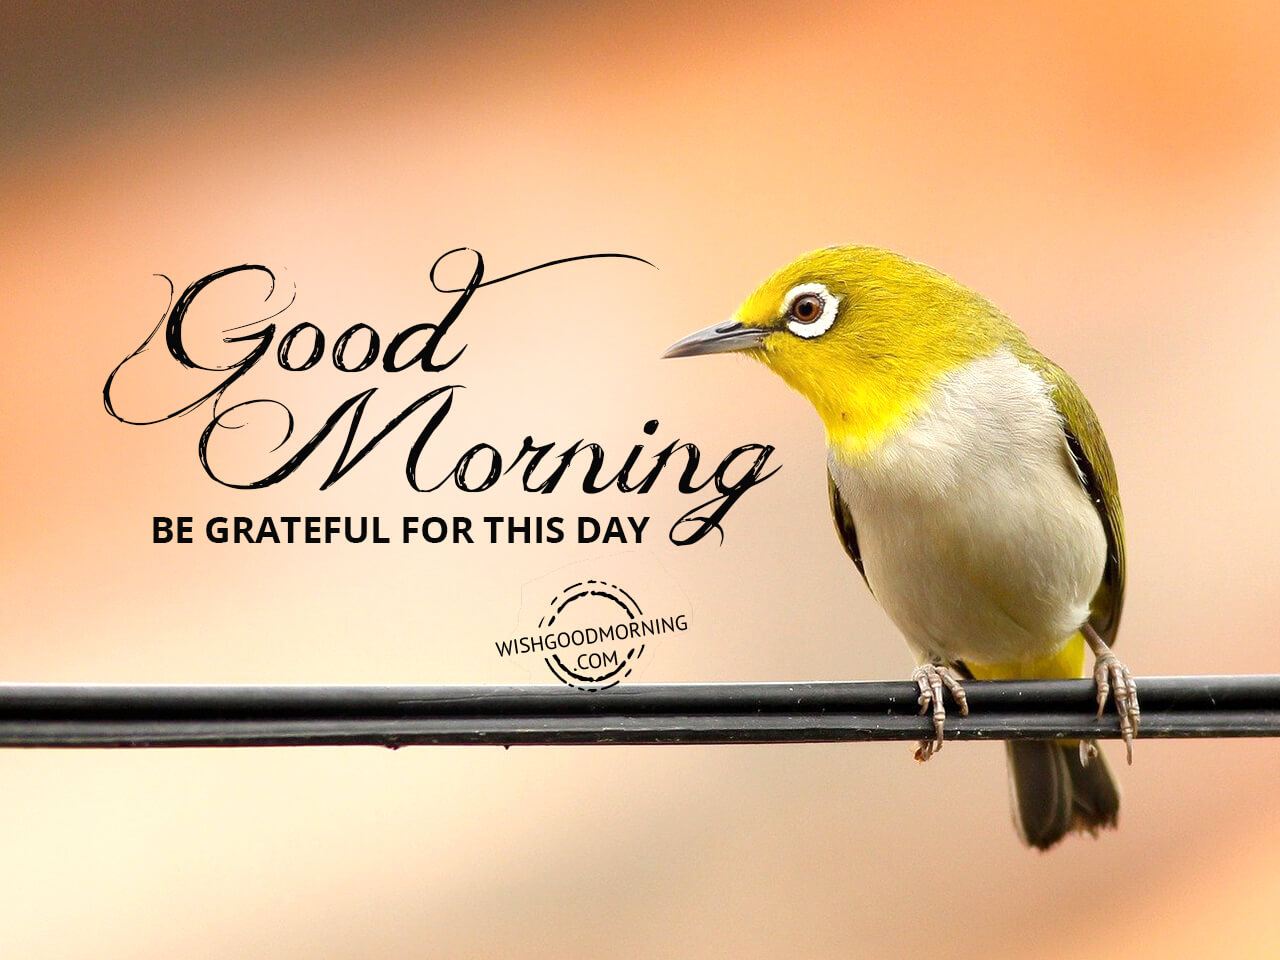 Very Good Morning - Good Morning Pictures – WishGoodMorning.com